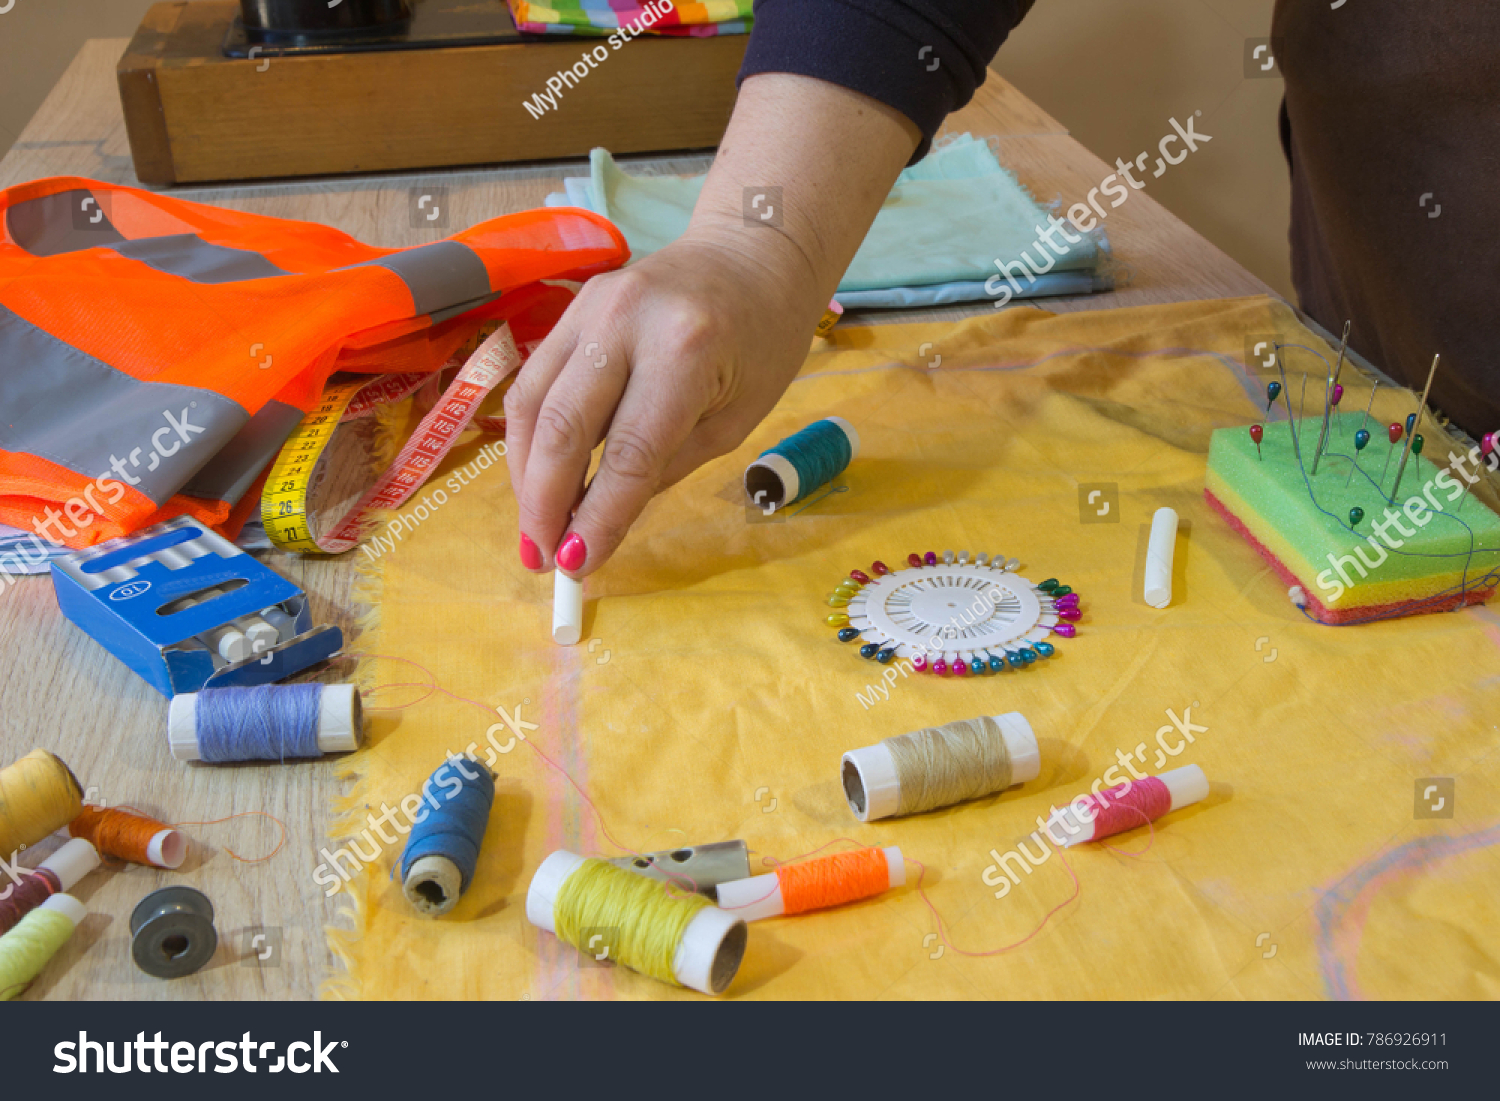 Woman dressmaker drawing tailor pattern with chalk for a clothing on the table. The outline on the fabric painted chalk. Garment industry, tailoring concept #786926911